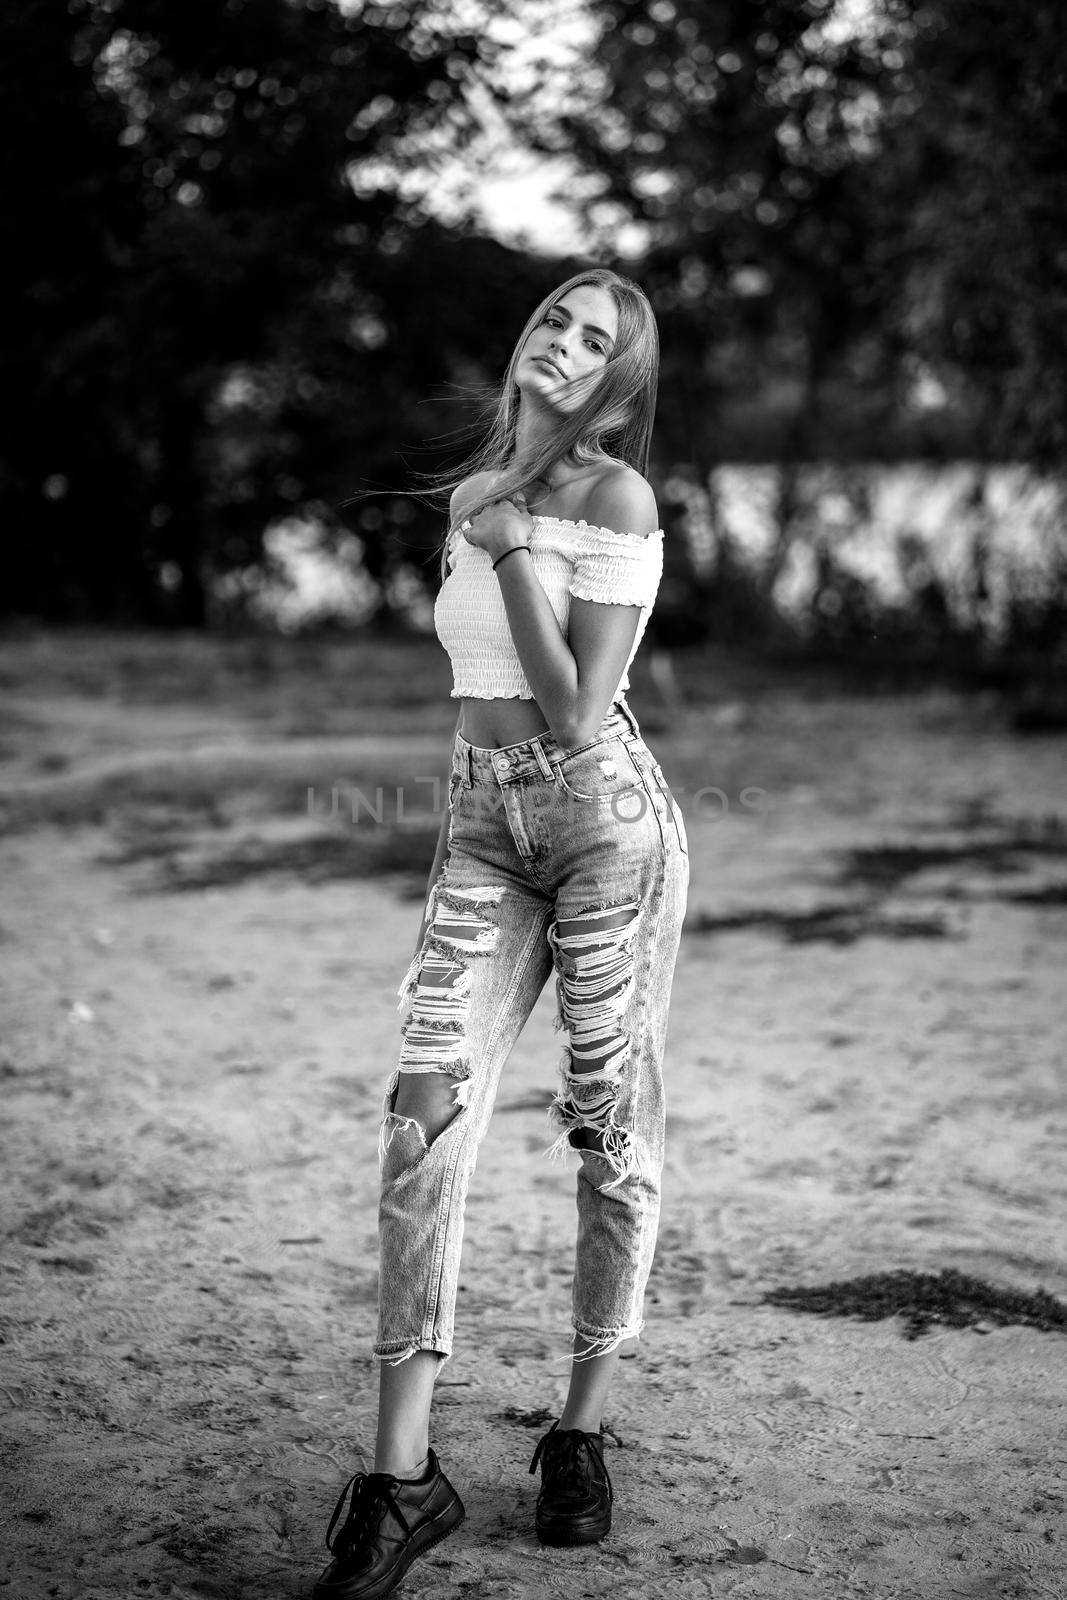 Beautiful teen girl posing full length against trees on blurred background at river side. Black and white image.